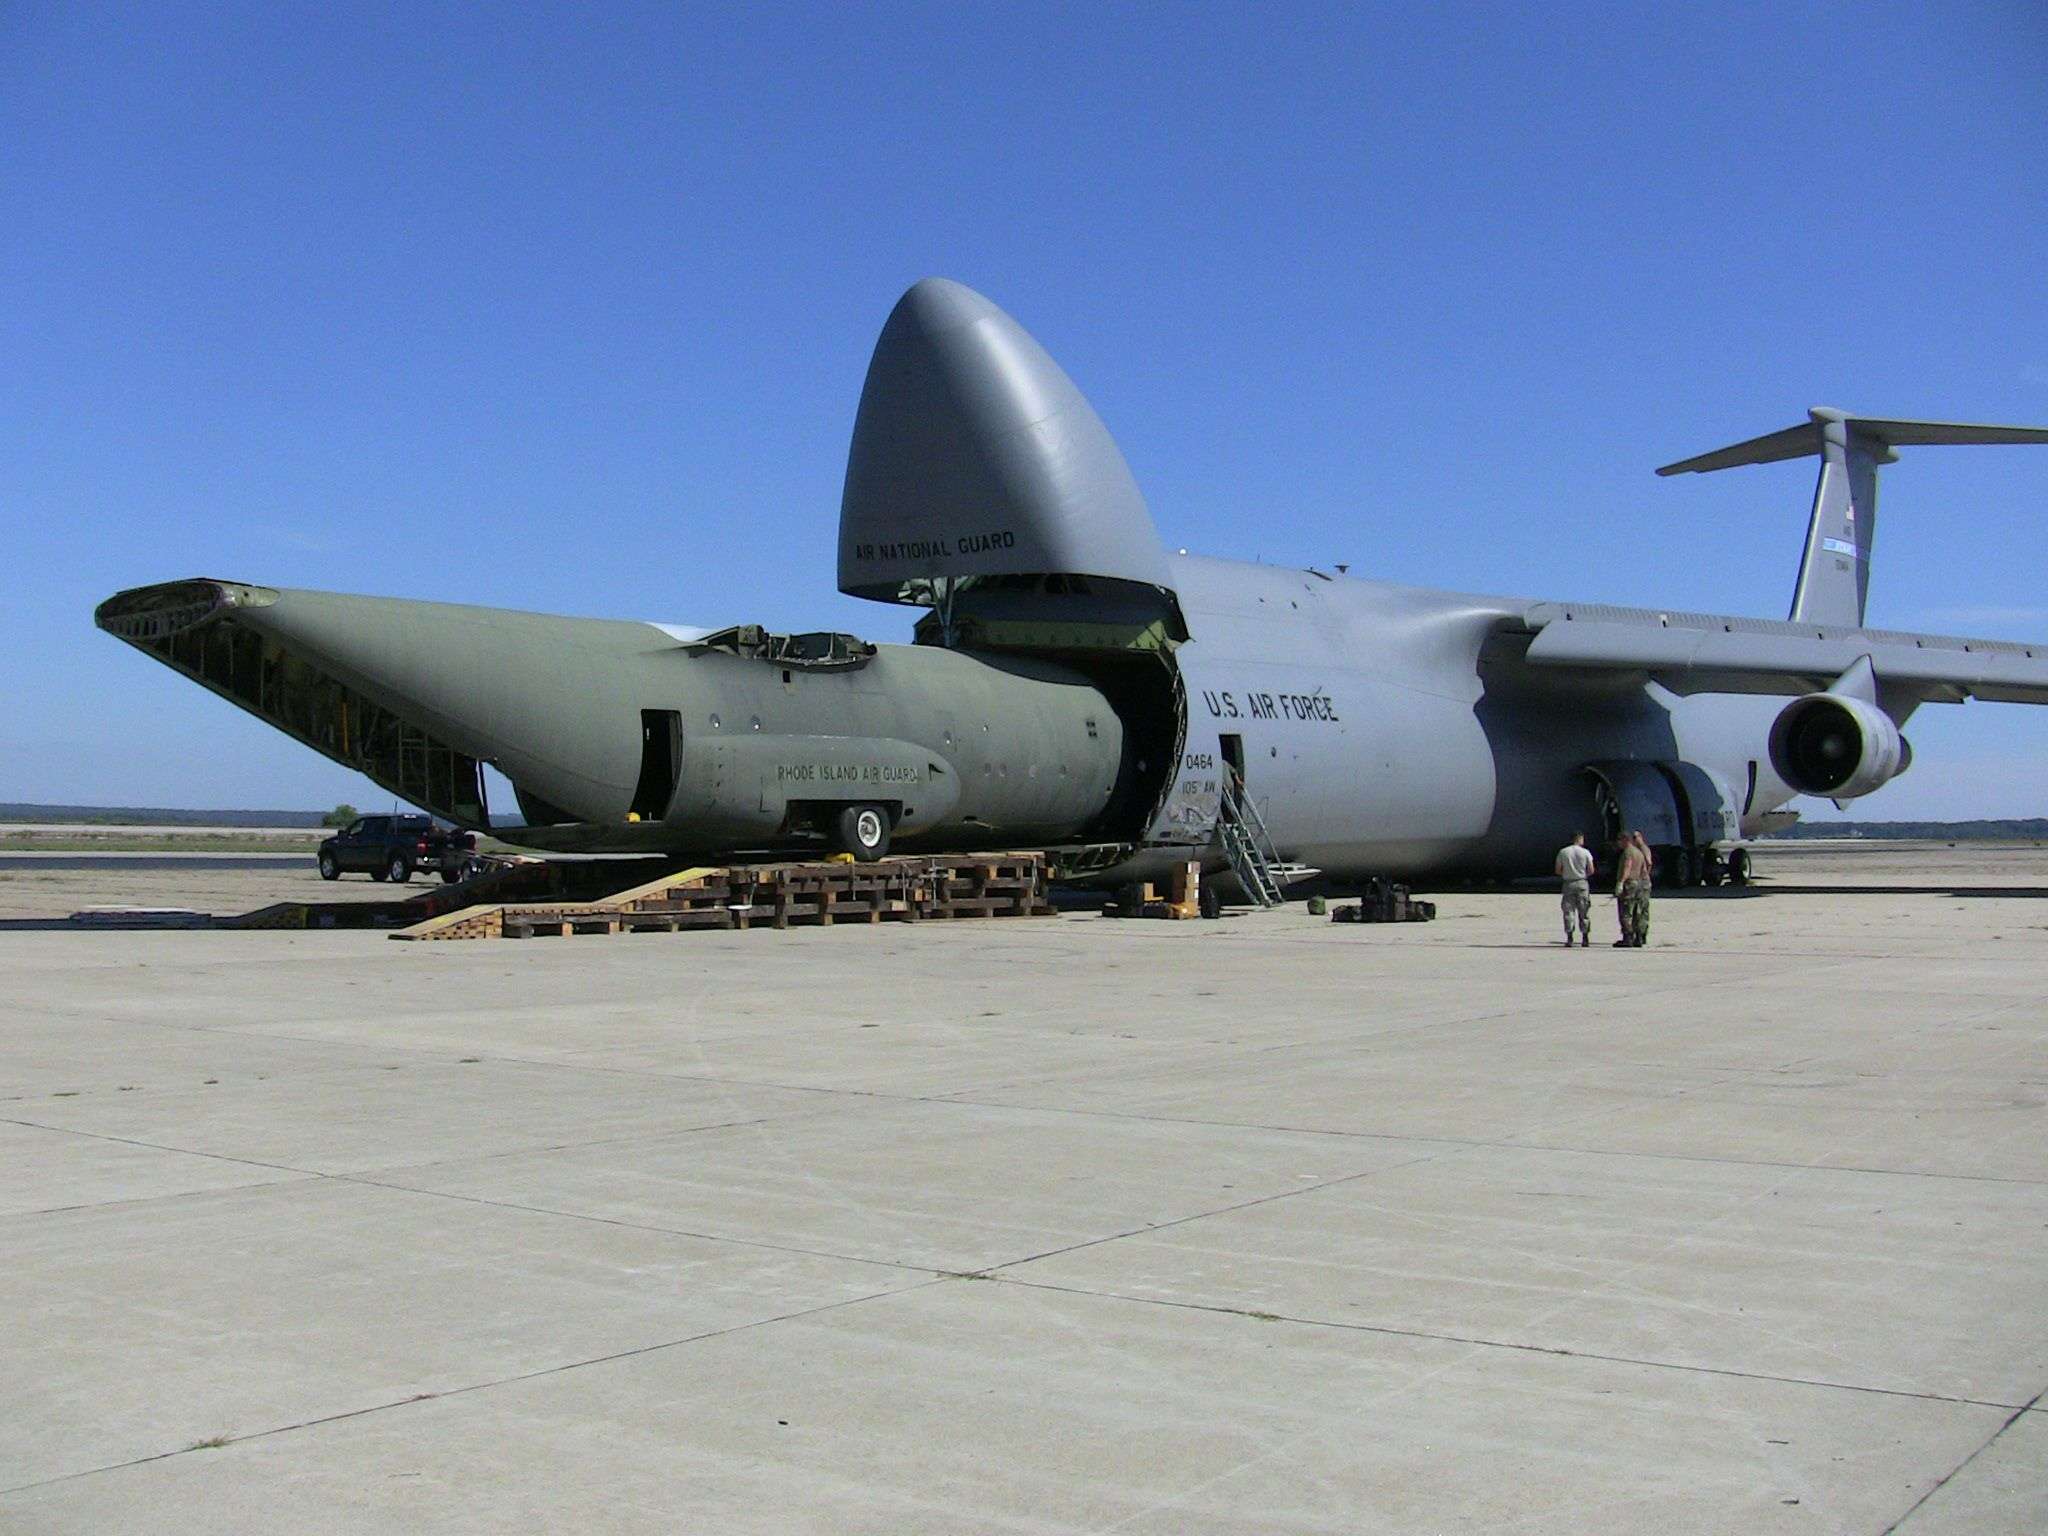 The C-130 is a big plane in its own right, but its fuselage fits easily